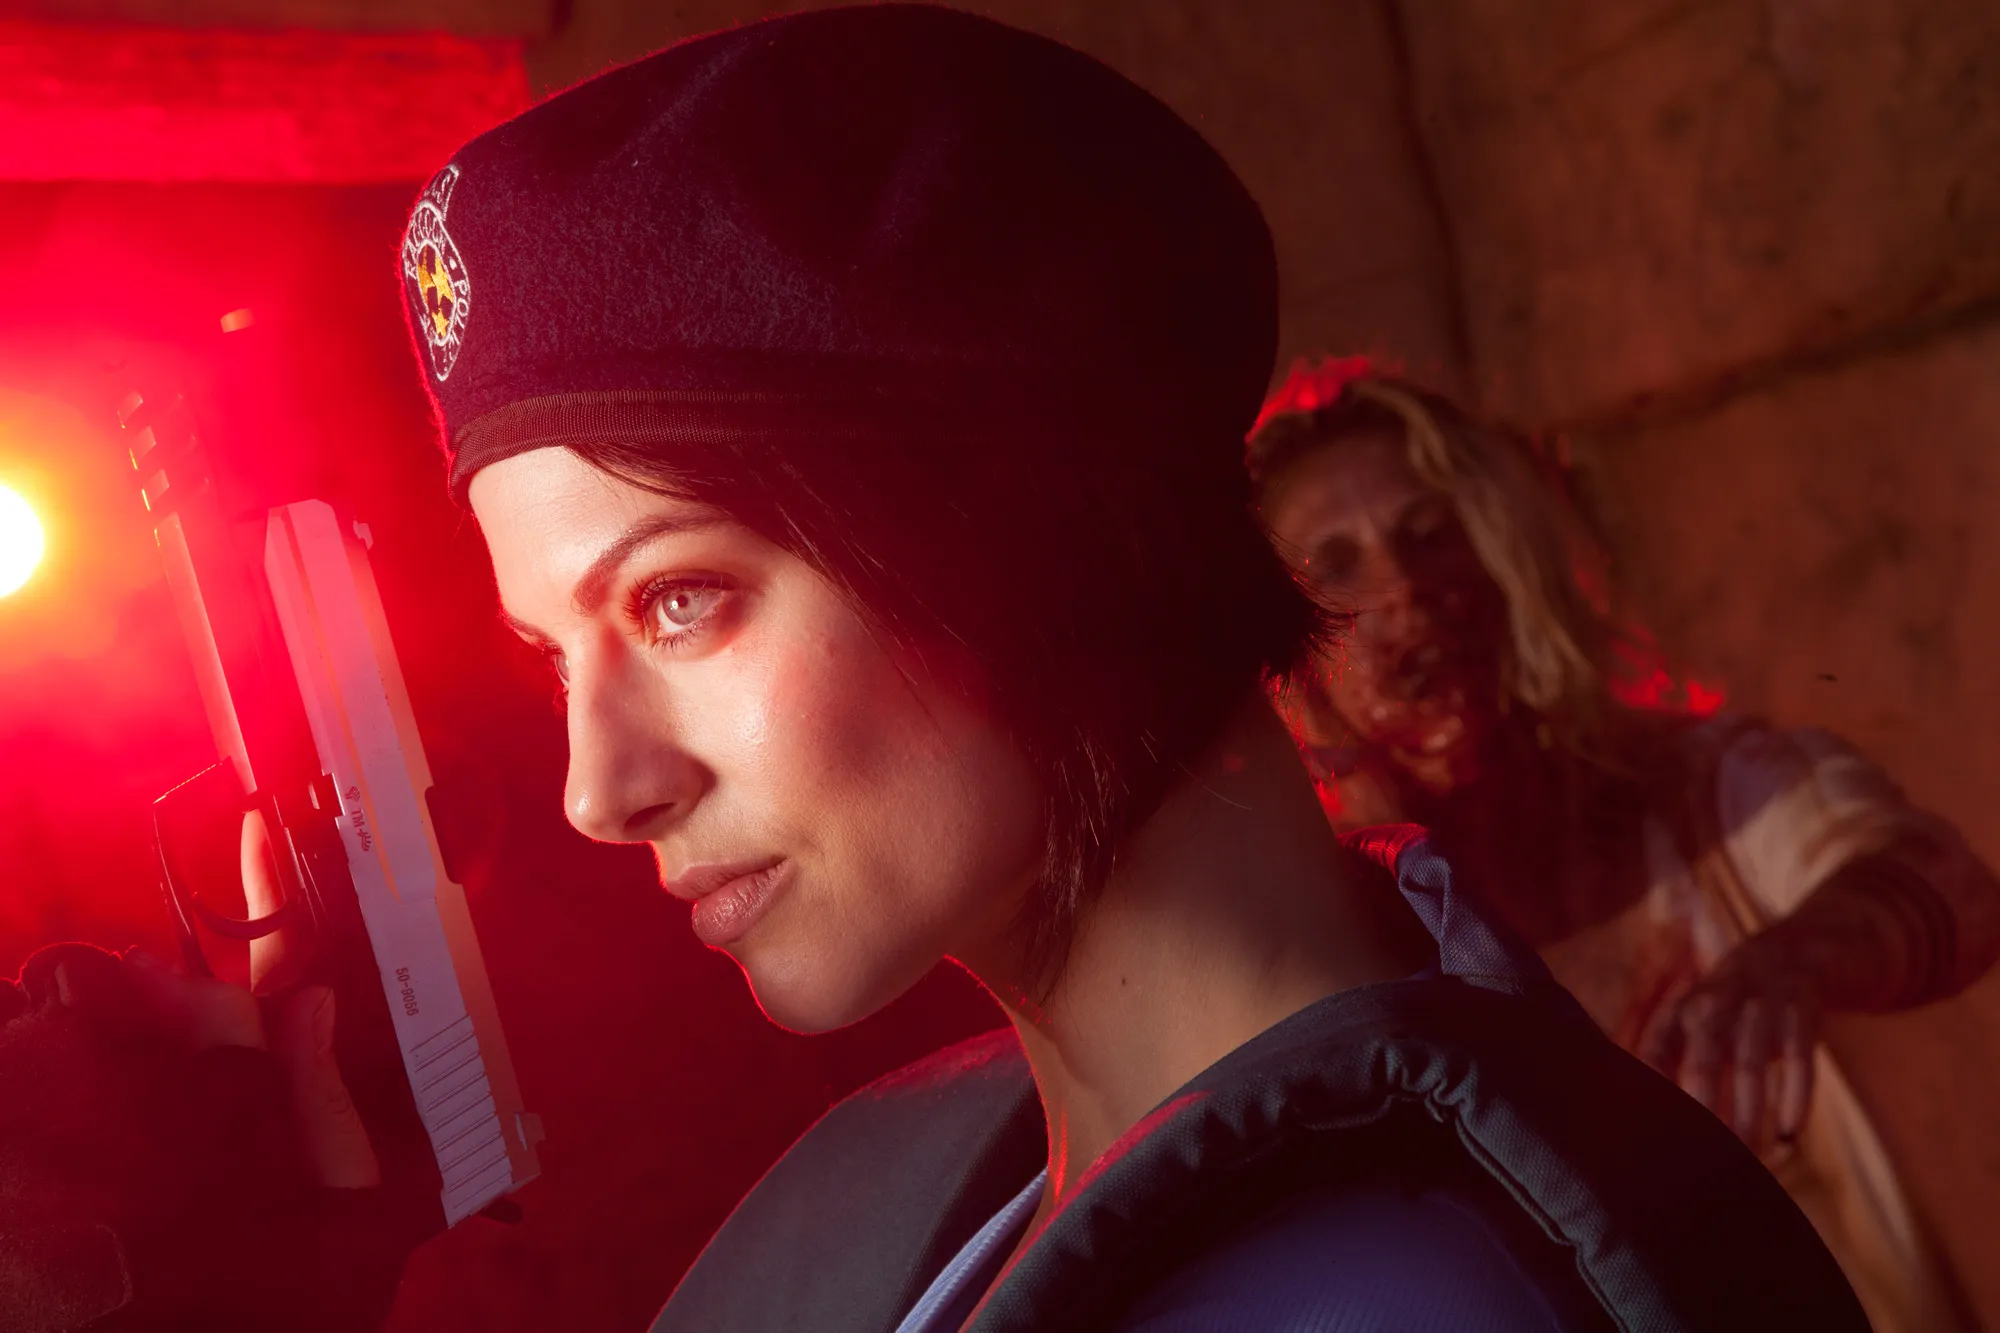 This Resident Evil Actress' Jill Valentine Cosplay Is Perfect